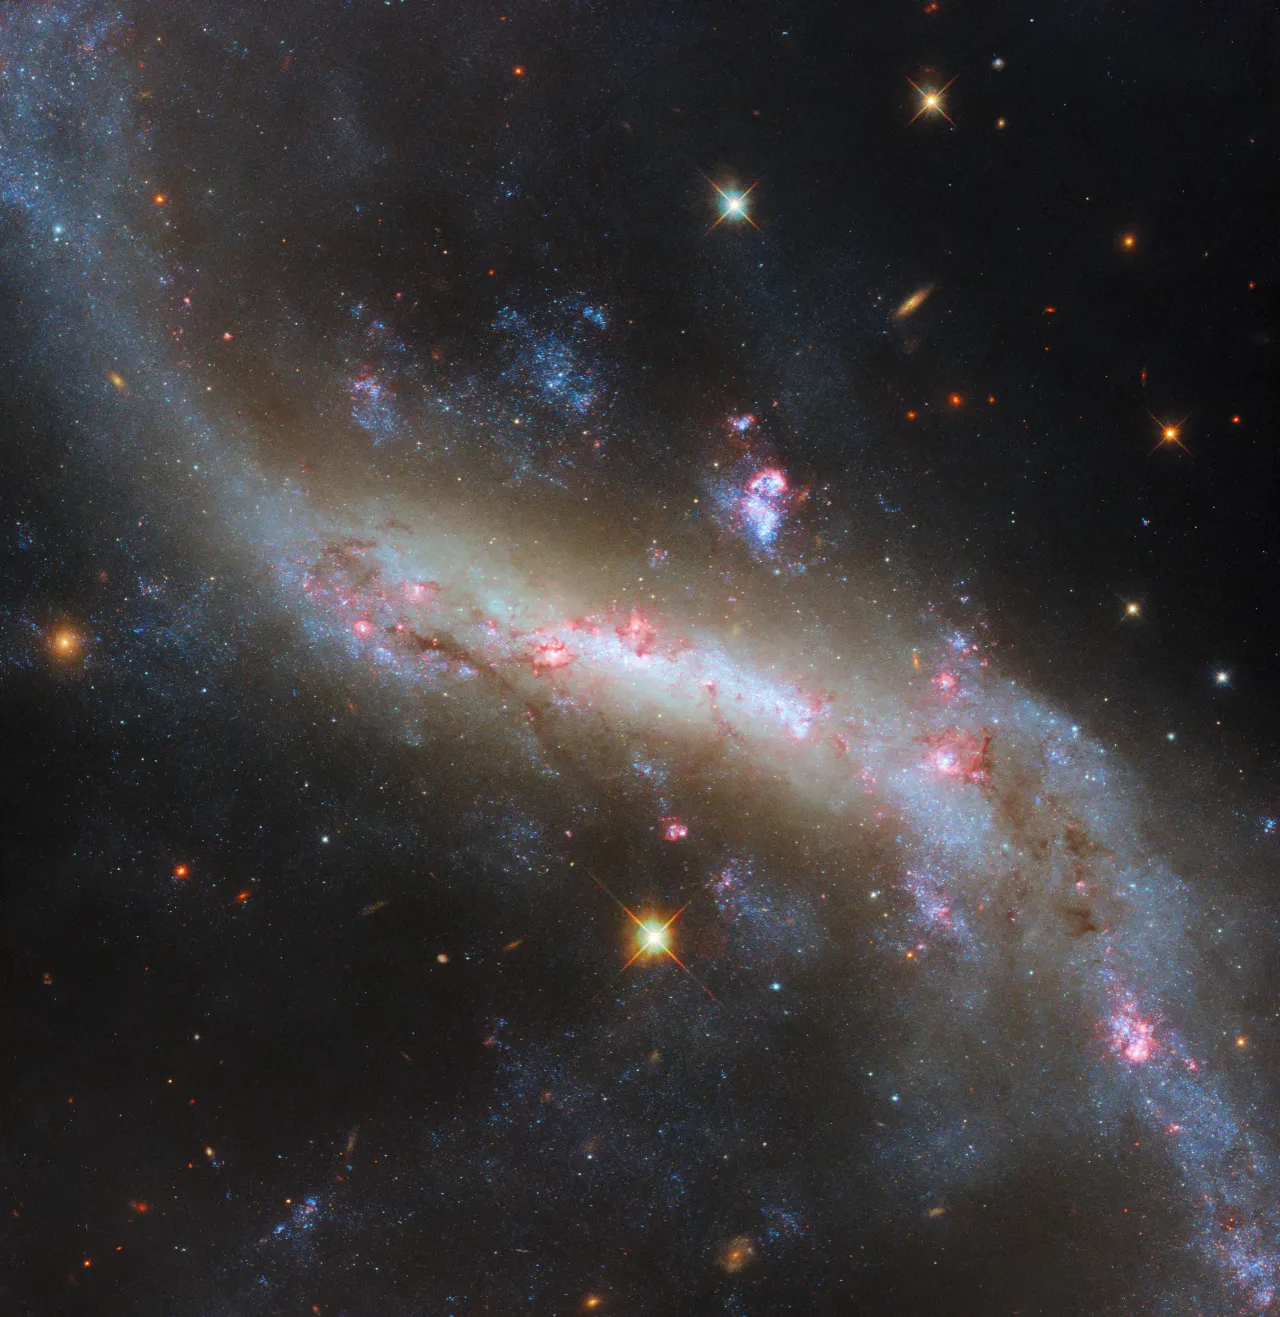 NASA's Hubble Space Telescope Captures Mesmerizing Image of Sweeping Spiral Galaxy 43 Million Light-Years From Earth